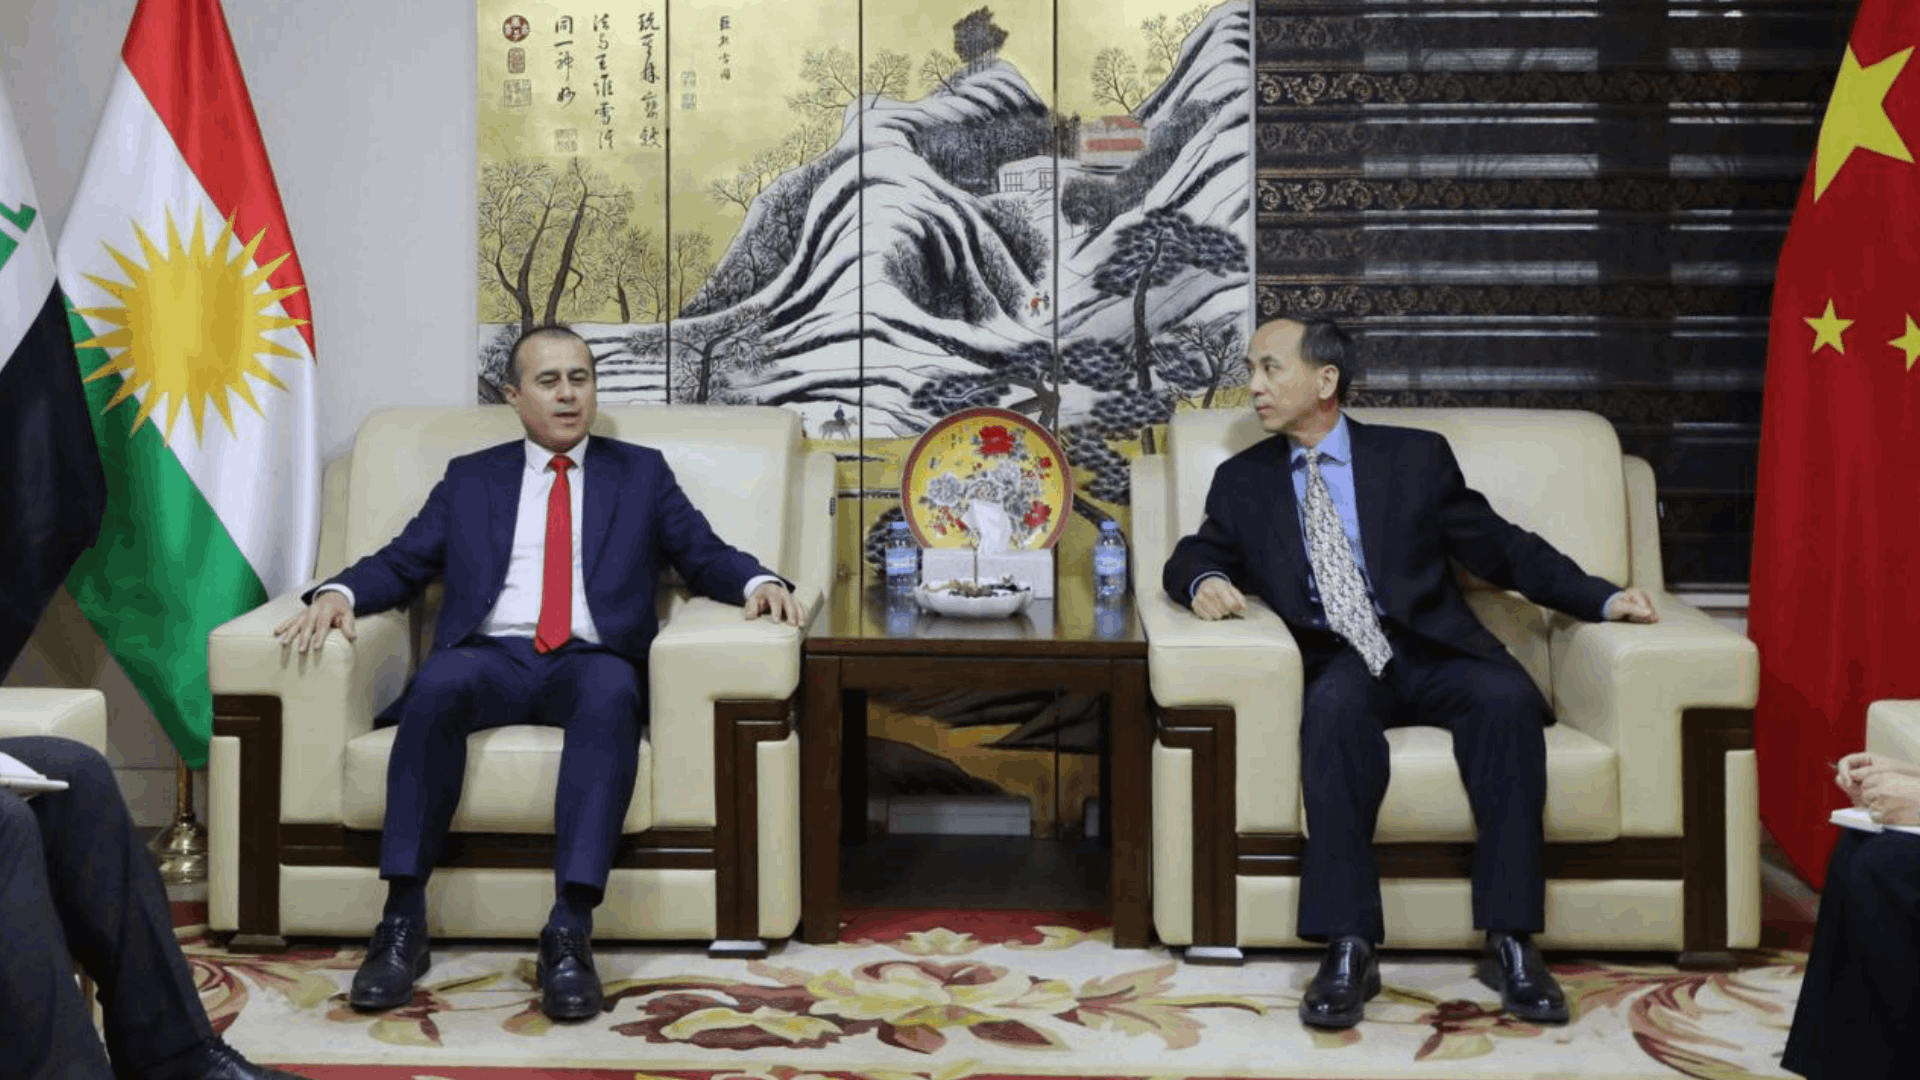 PUK's Head of Media Board meets Chinese CG